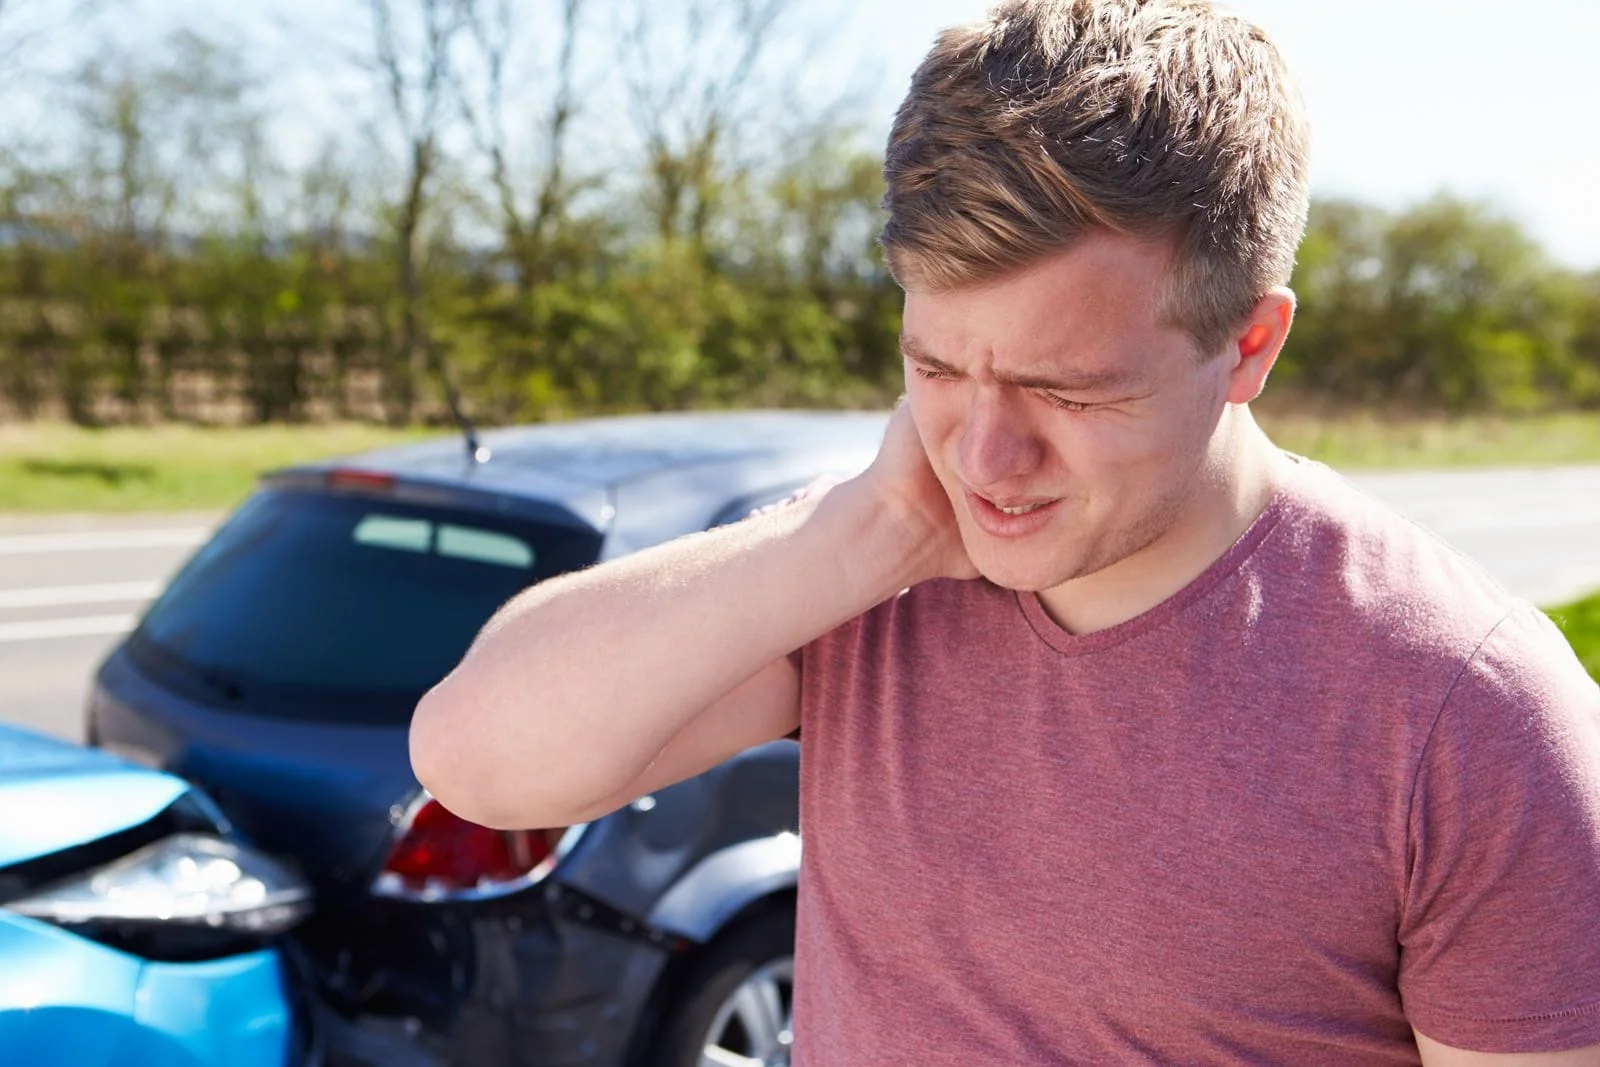 man holding his neck in pain from whiplash after an auto accident injury